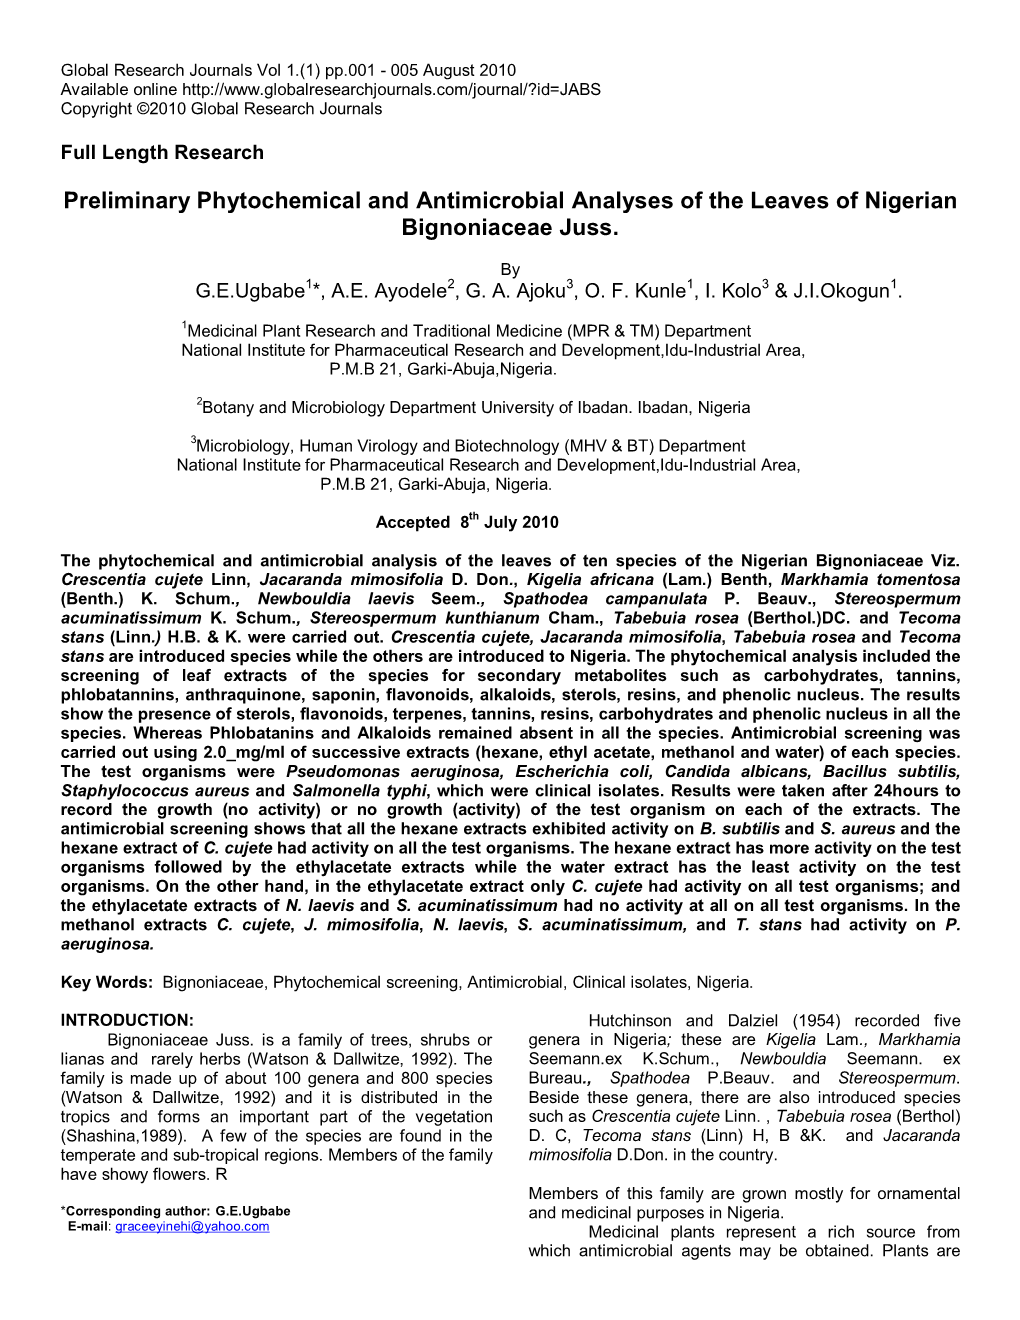 Preliminary Phytochemical and Antimicrobial Analyses of the Leaves of Nigerian Bignoniaceae Juss